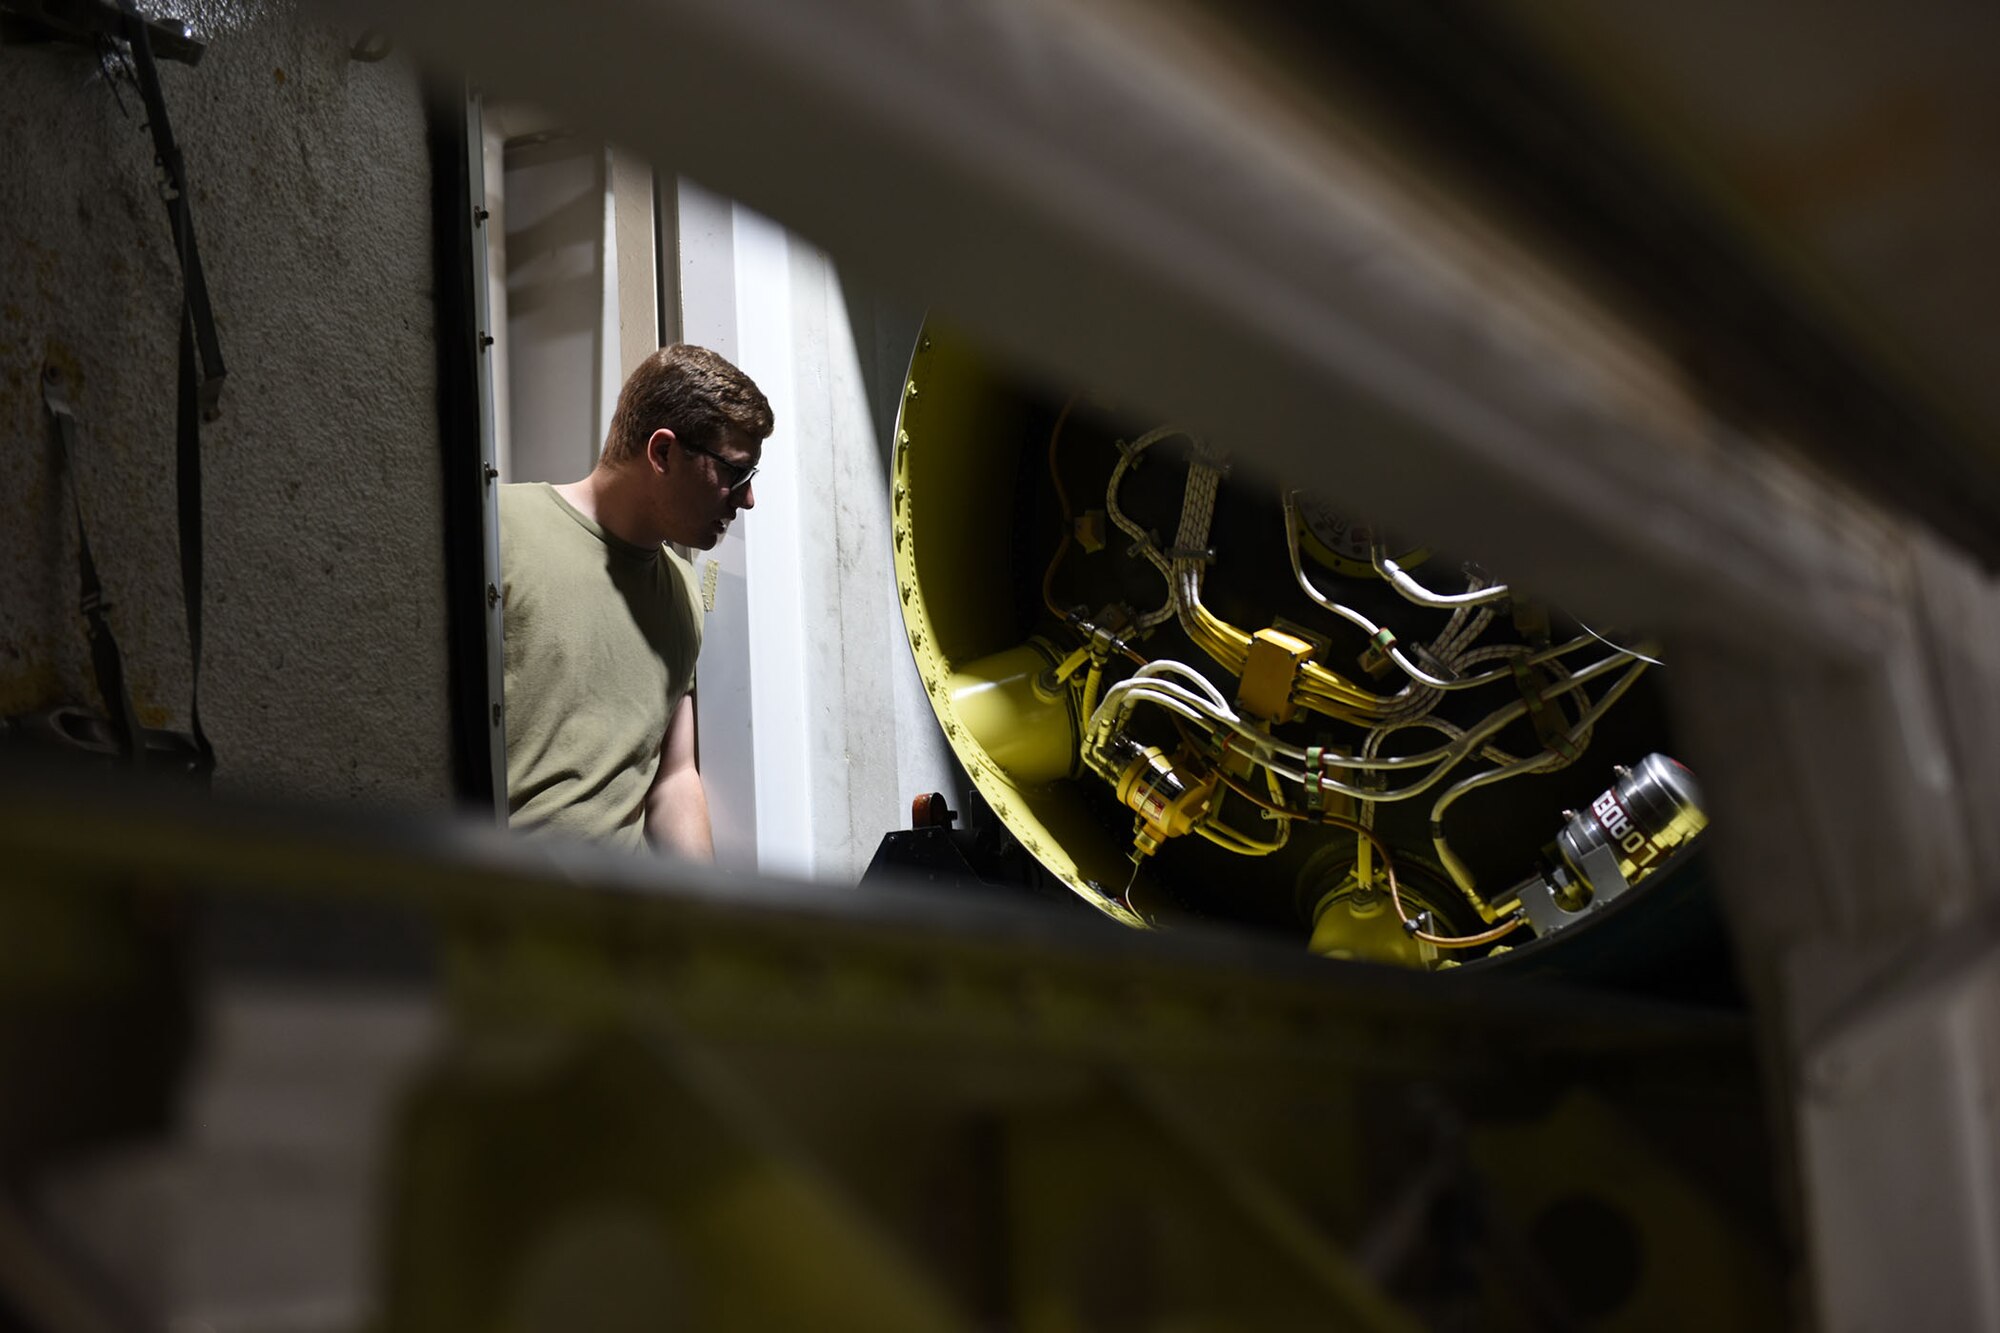 Airman peers inside of the T.E. van to inspect the booster of the missile.